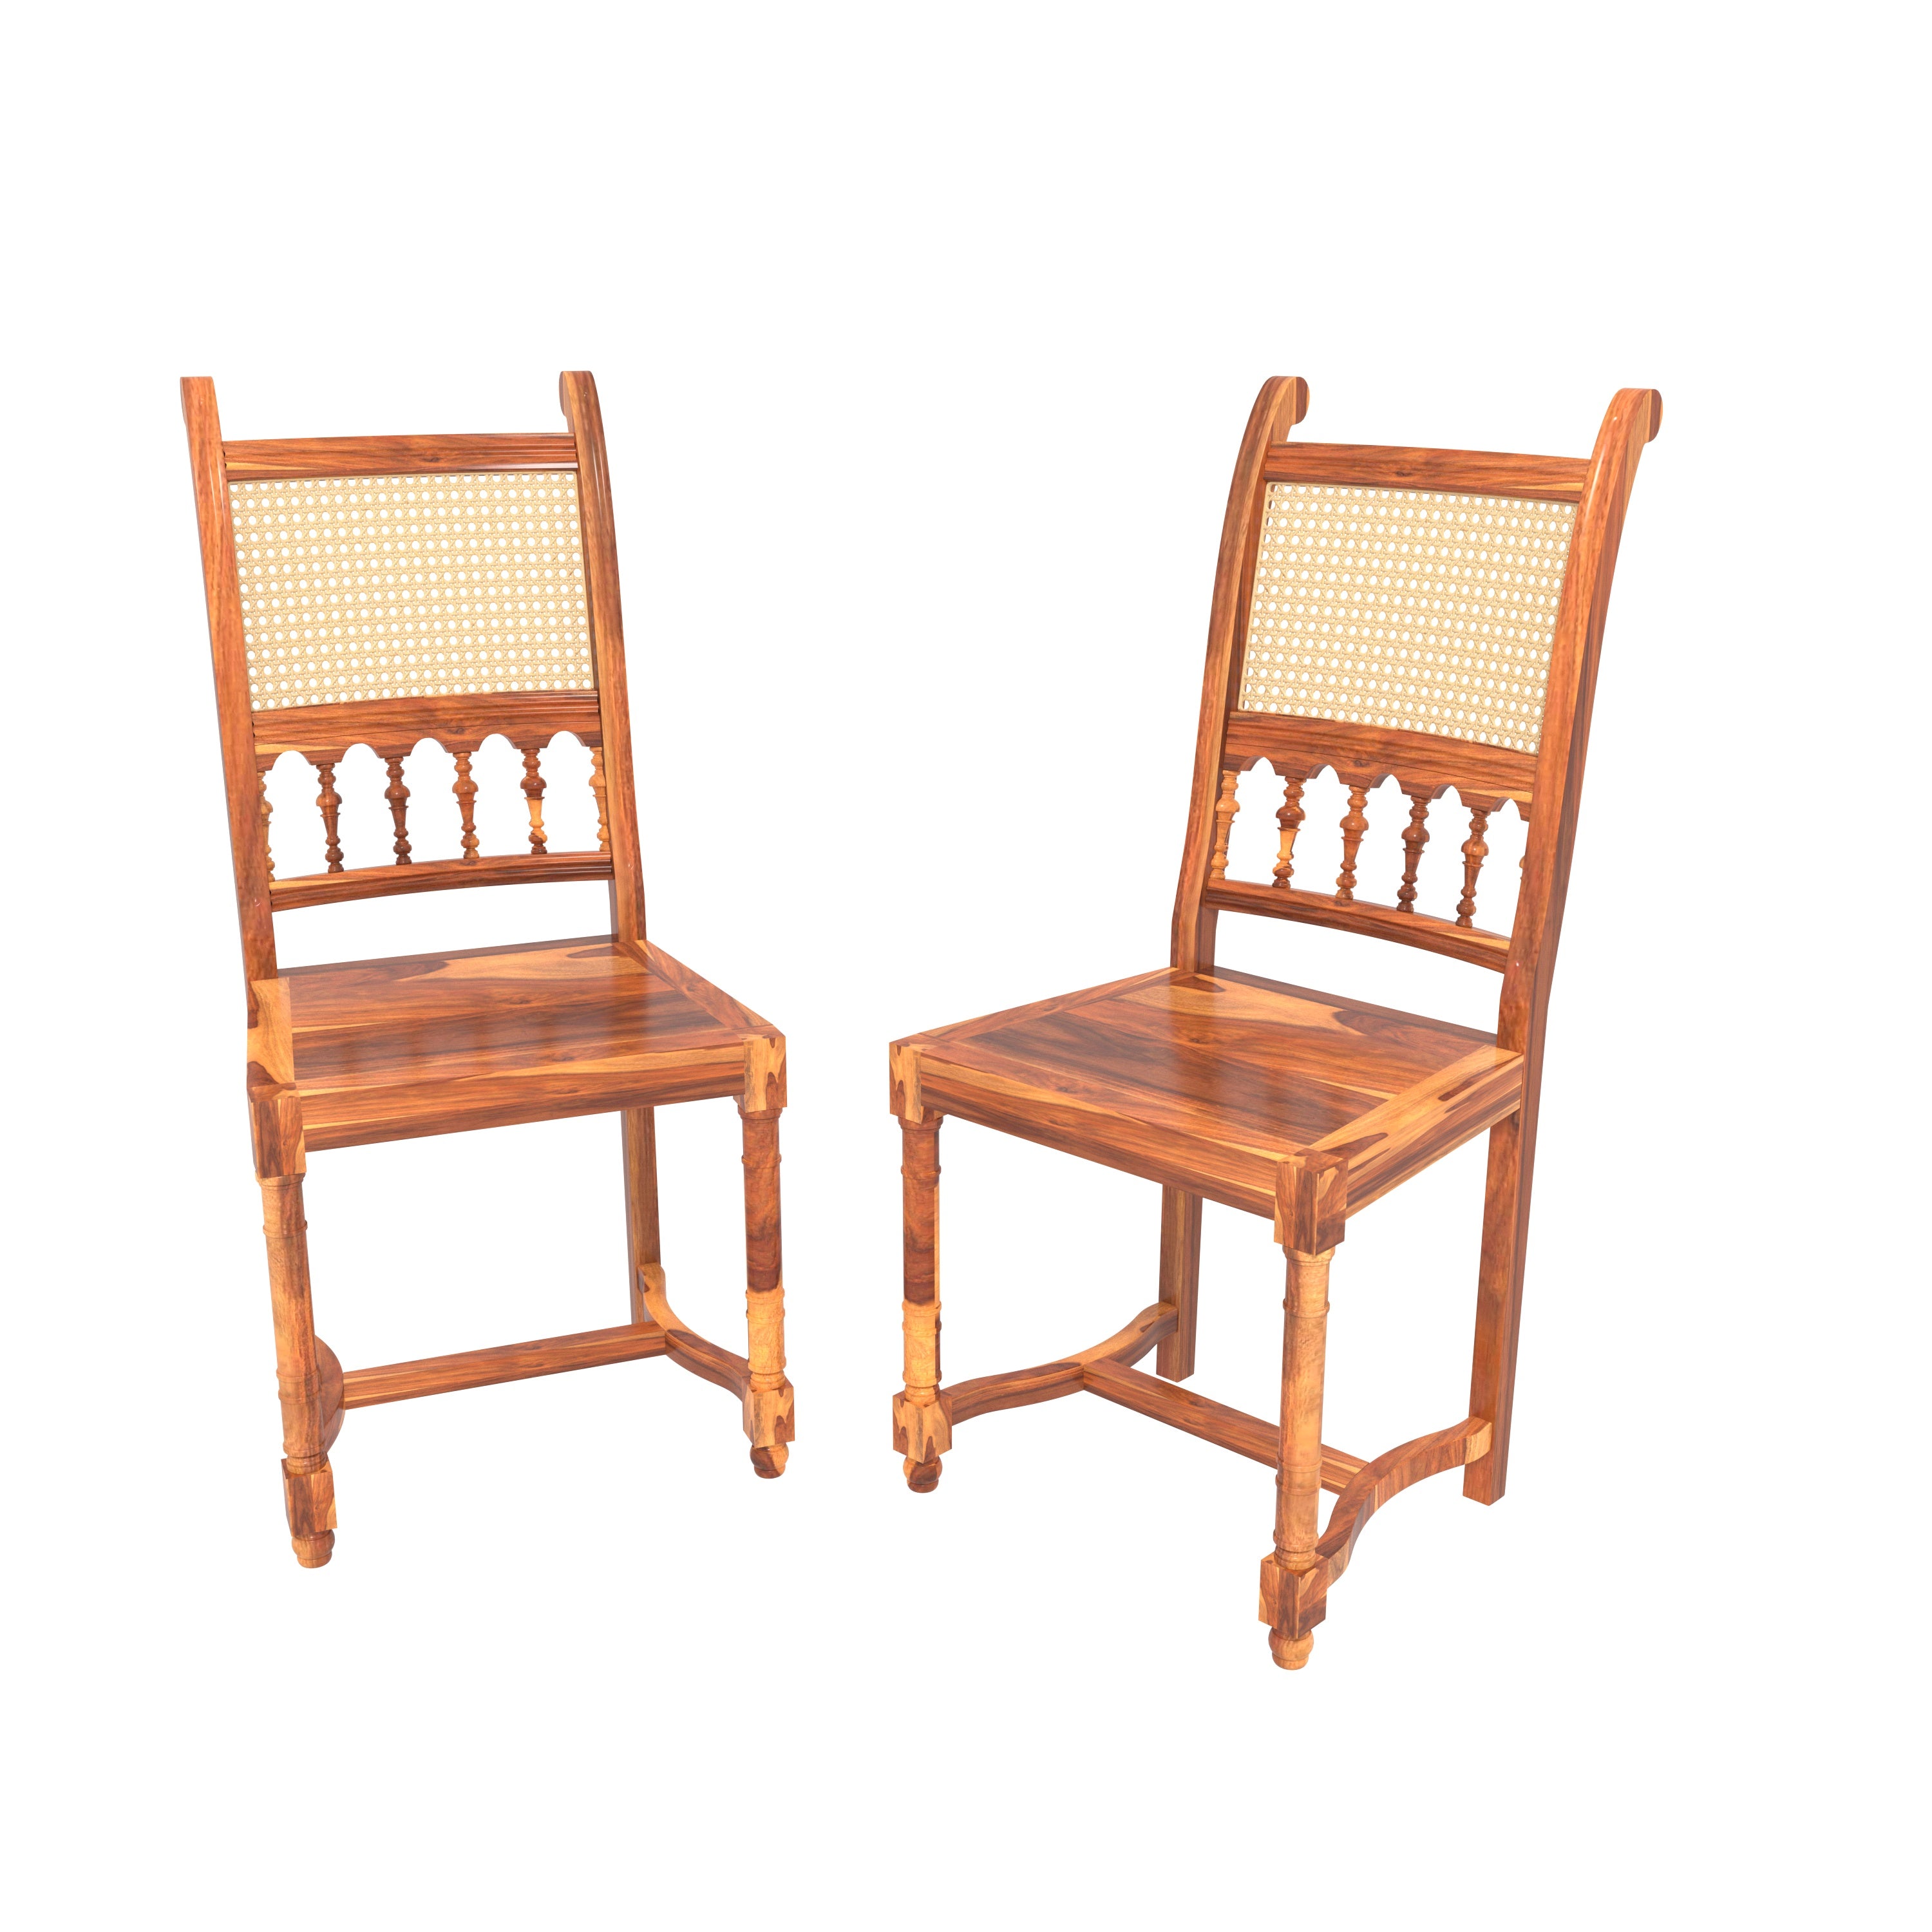 Classic Handmade Cane with Pillar Back Wooden Seating Chair Set of 2 Dining Chair